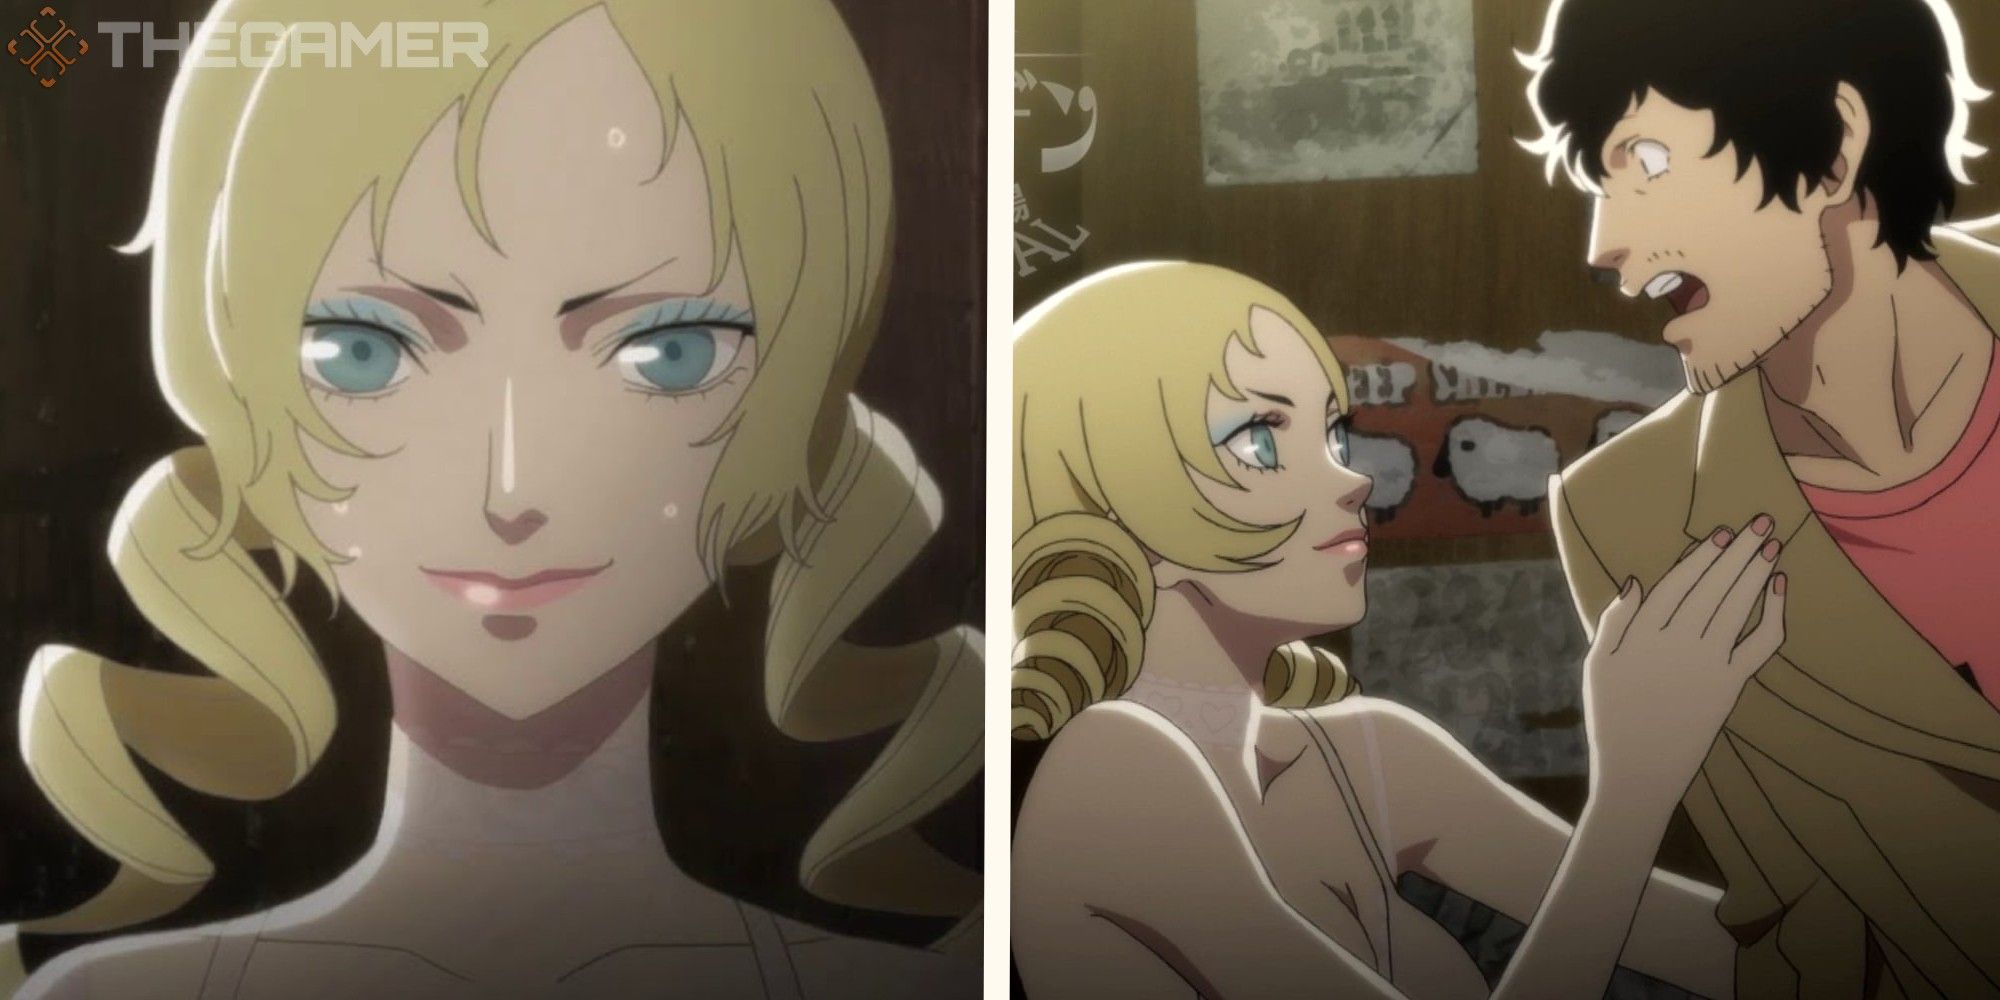 image of catherine looking forward, next to image of catherine grabbing on to vincents shoulder